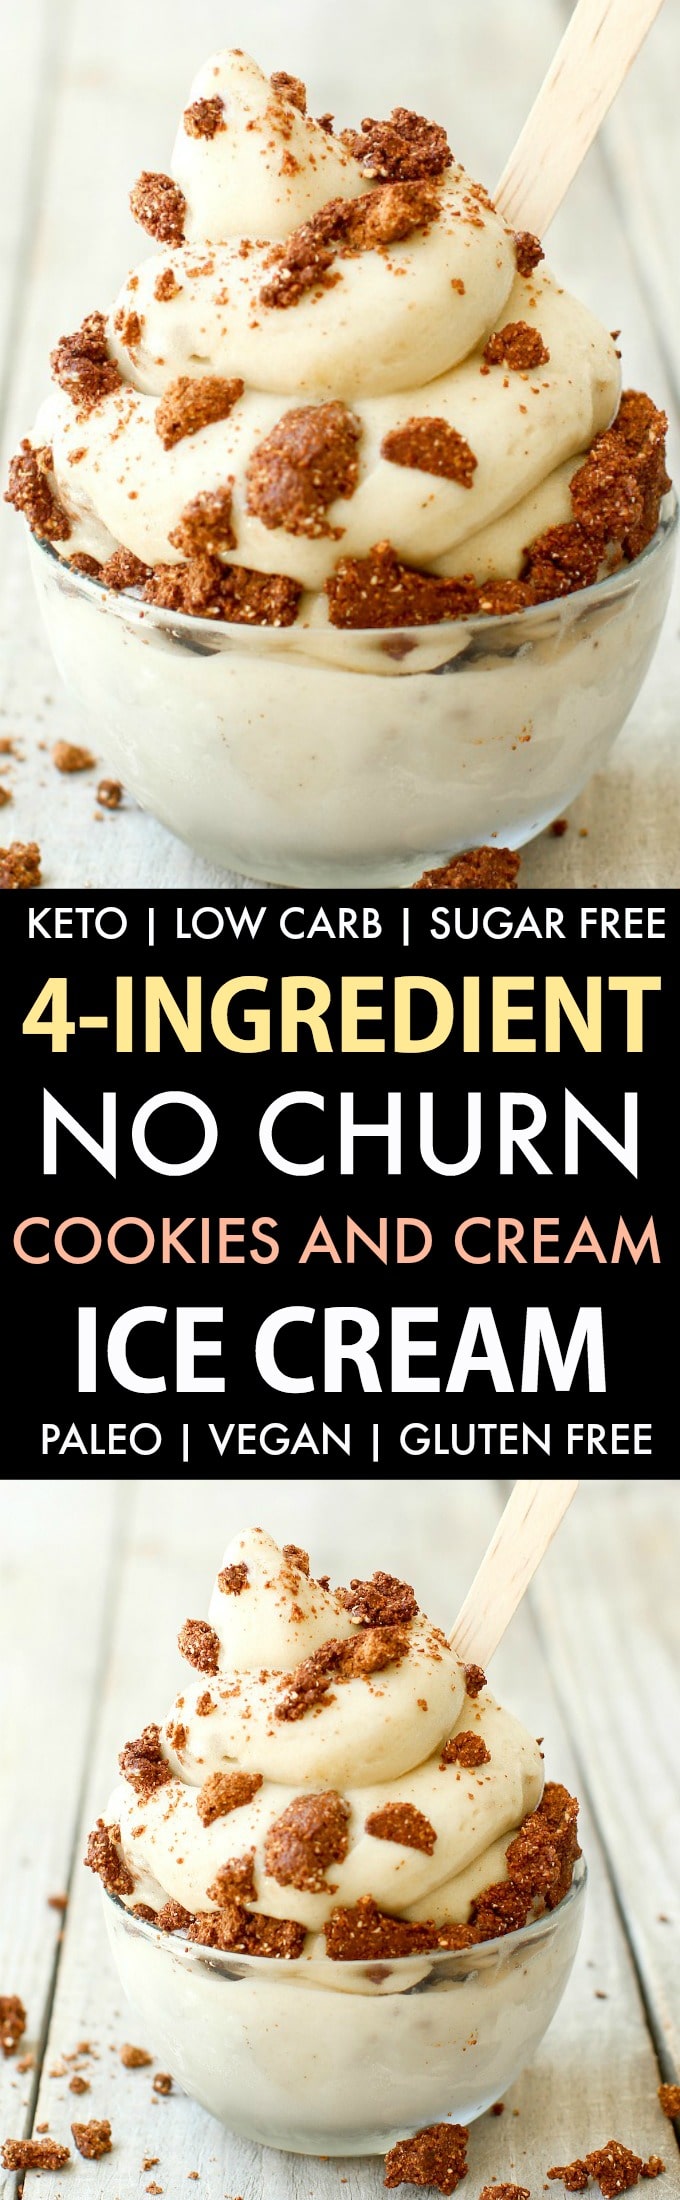 No Churn Keto Cookies and Cream Ice Cream (Paleo, Vegan, Dairy Free, Low Carb)- An easy simple keto no churn vanilla ice cream recipe loaded with healthy cookie chunks and made with NO ice cream maker! 4 ingredients and dairy free! #ketoicecream #nochurn #lowcarbicecream #coconutmilkicecream | Recipe on thebigmansworld.com